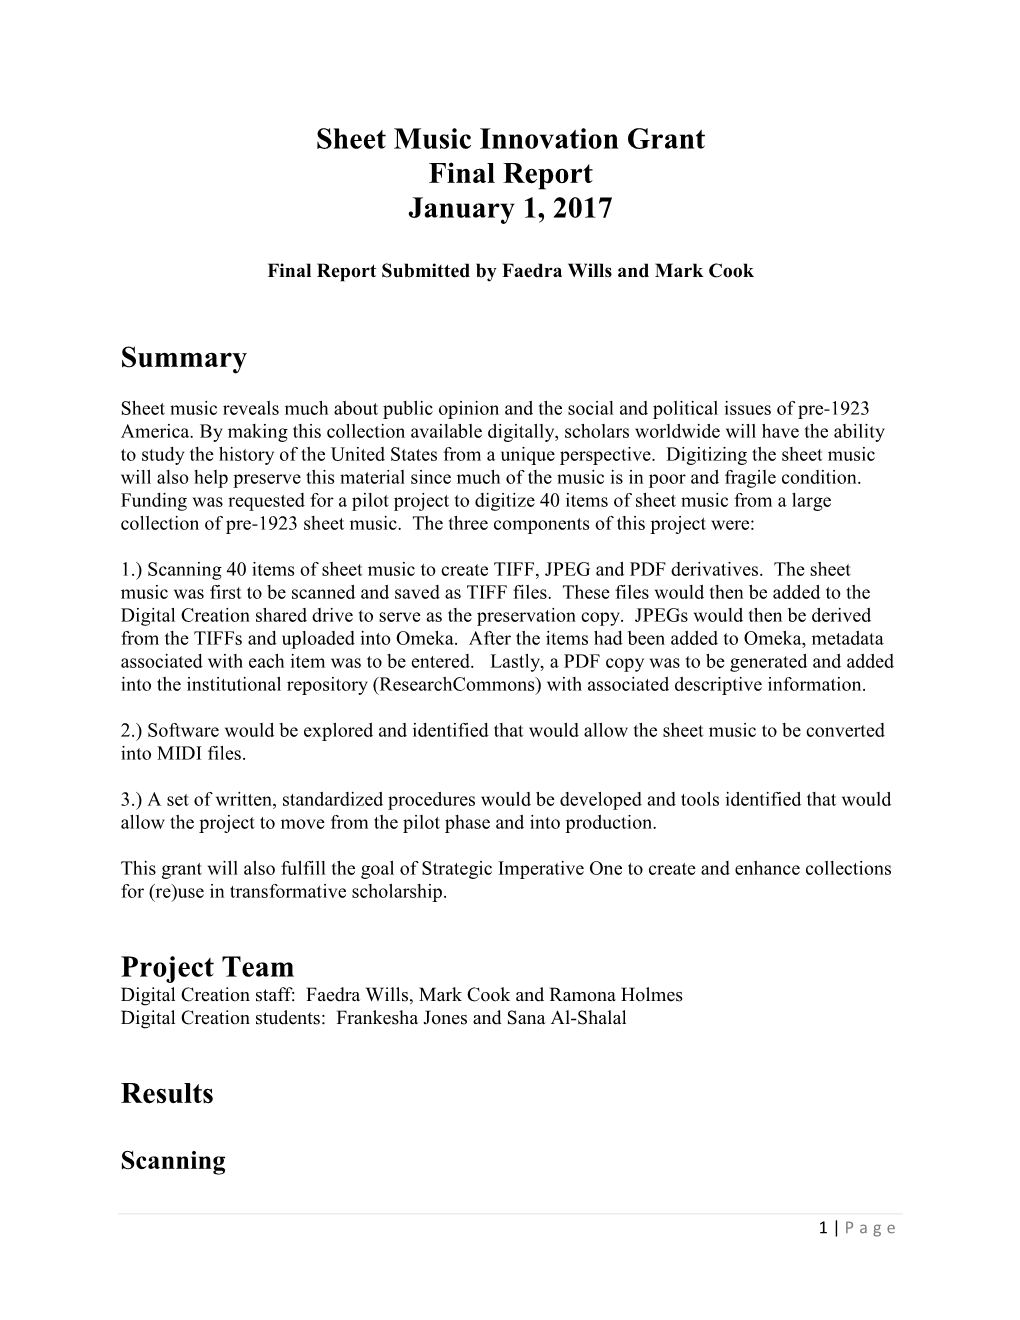 Sheet Music Innovation Grant Final Report January 1, 2017 Summary Project Team Results